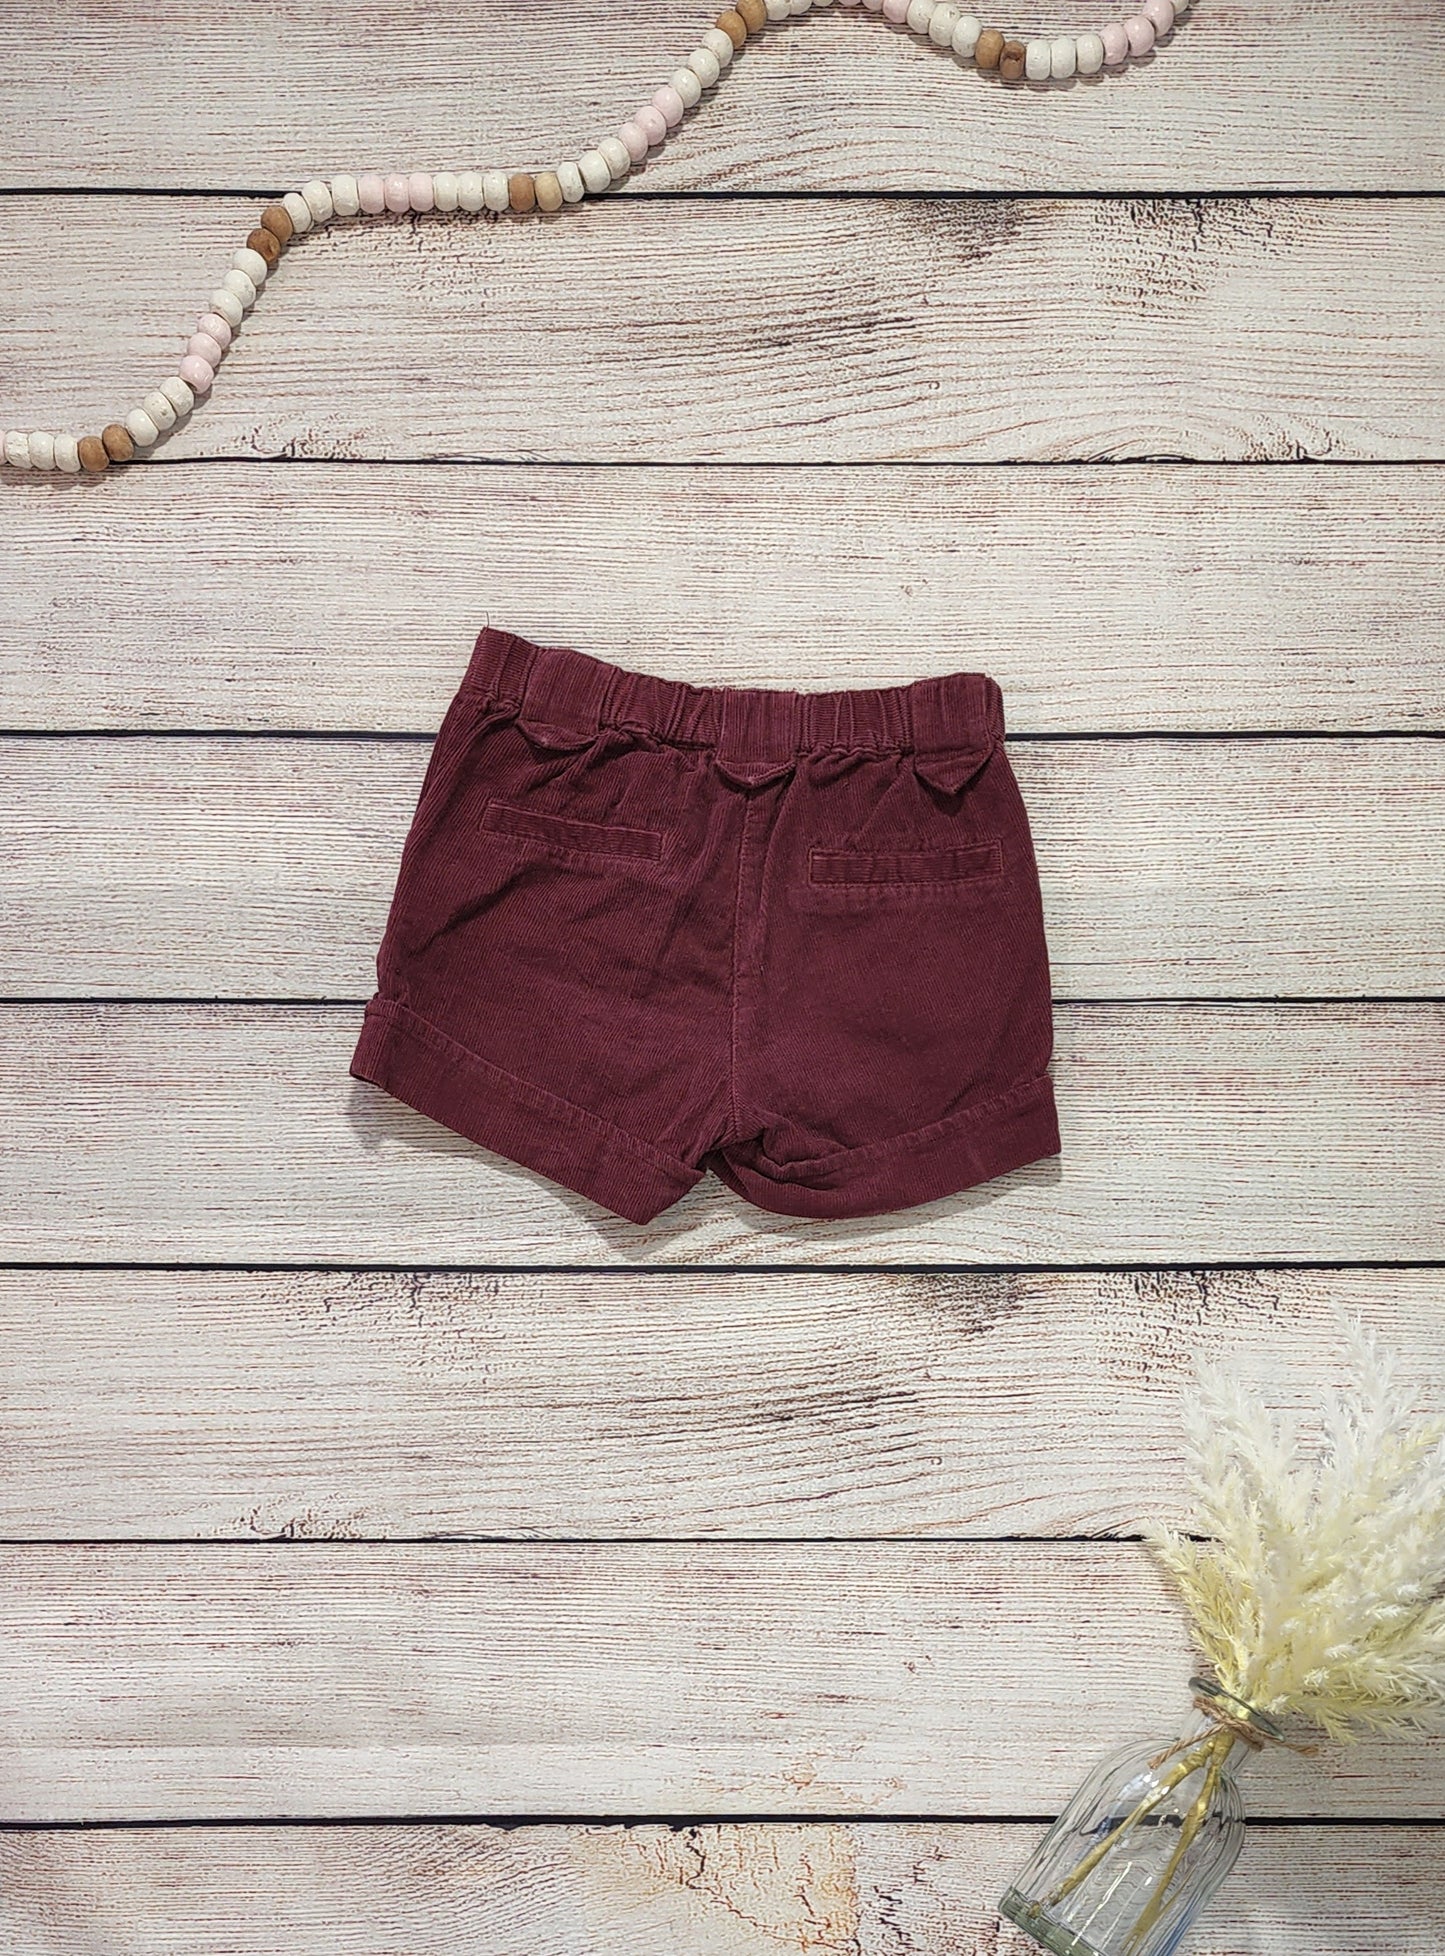 Hanna Andersson Shorts, Size 4